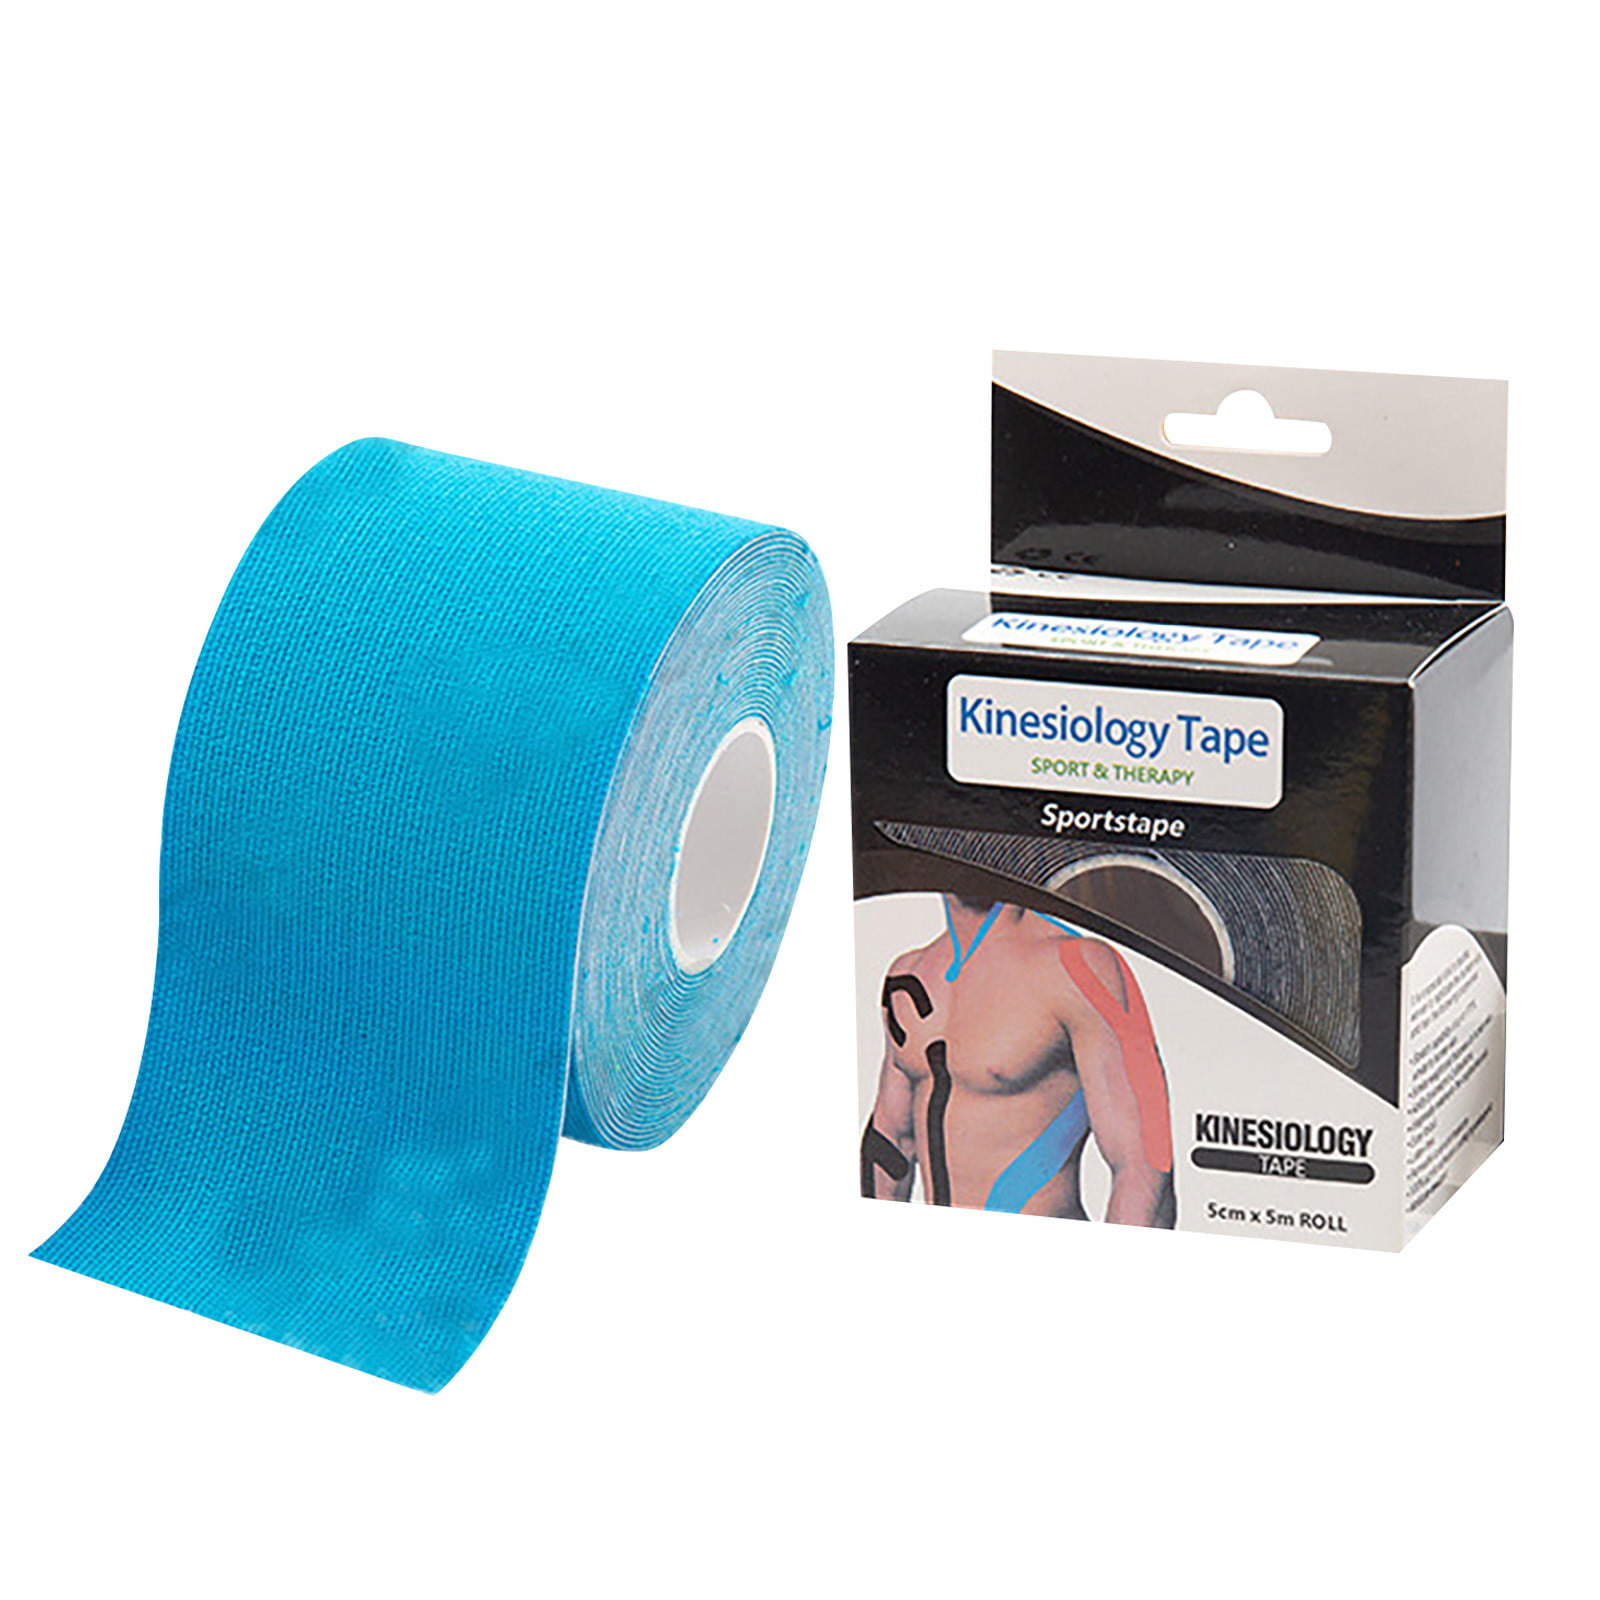 Kinesiology Tape 5cm X 5m Adhesive Tape For Skin Sport Tape For Muscle  Recovery And Pain Relief From Rainlnday, $21.41